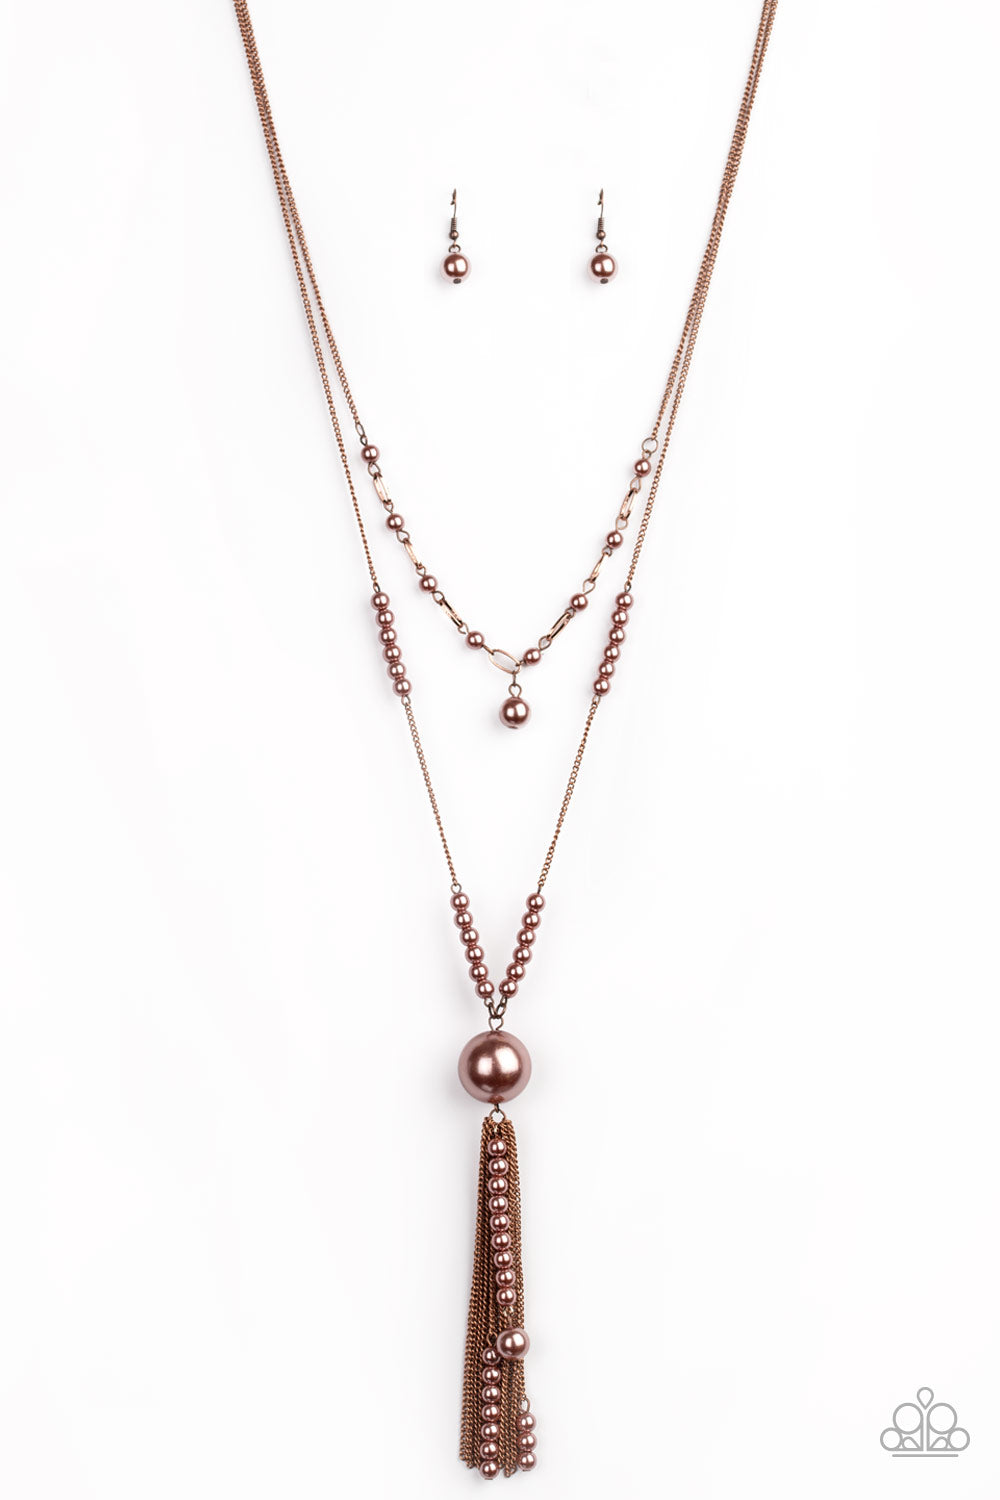 SOLD OUT-Paparazzi Necklace - Abstract Elegance - Copper